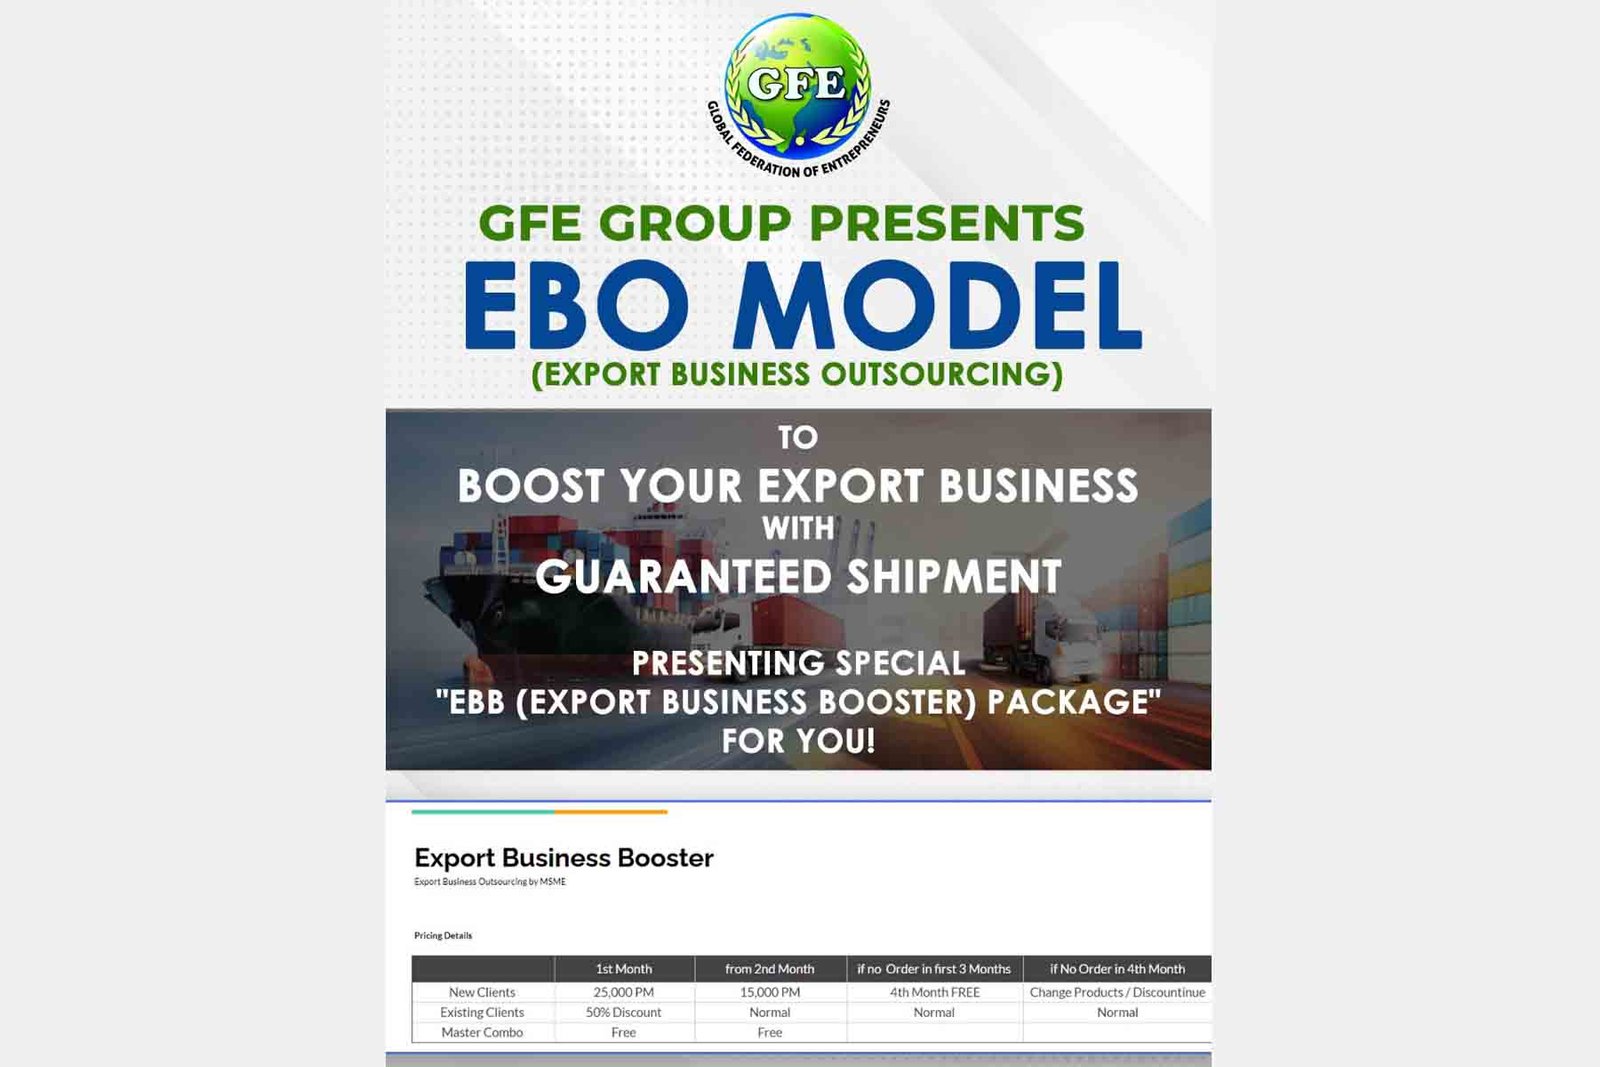 To boost Indian export in 2022 GFE launches an Export Business Outsourcing model